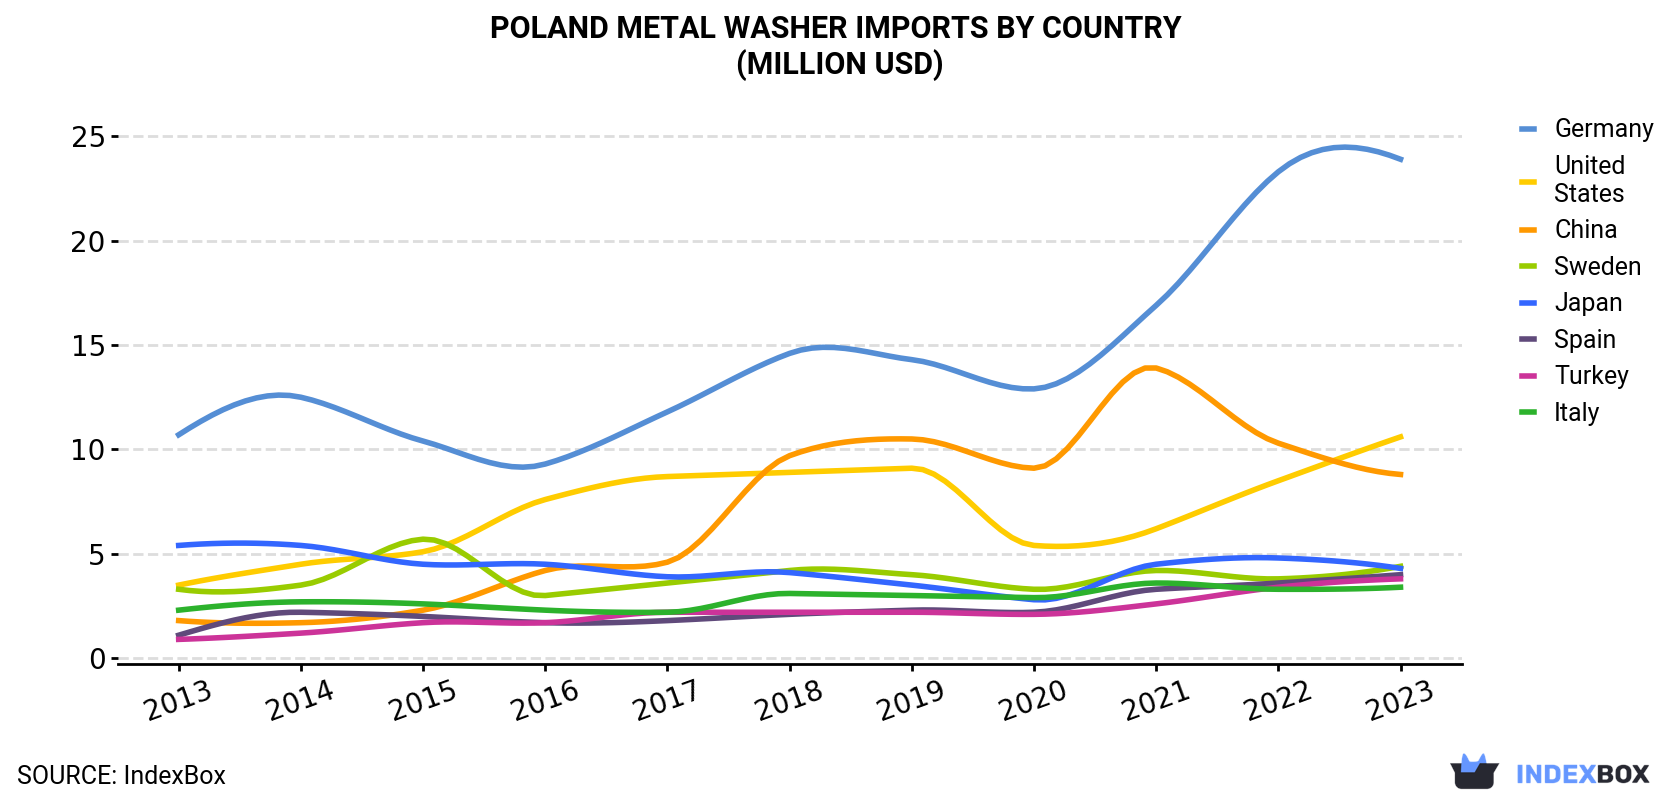 Poland Metal Washer Imports By Country (Million USD)